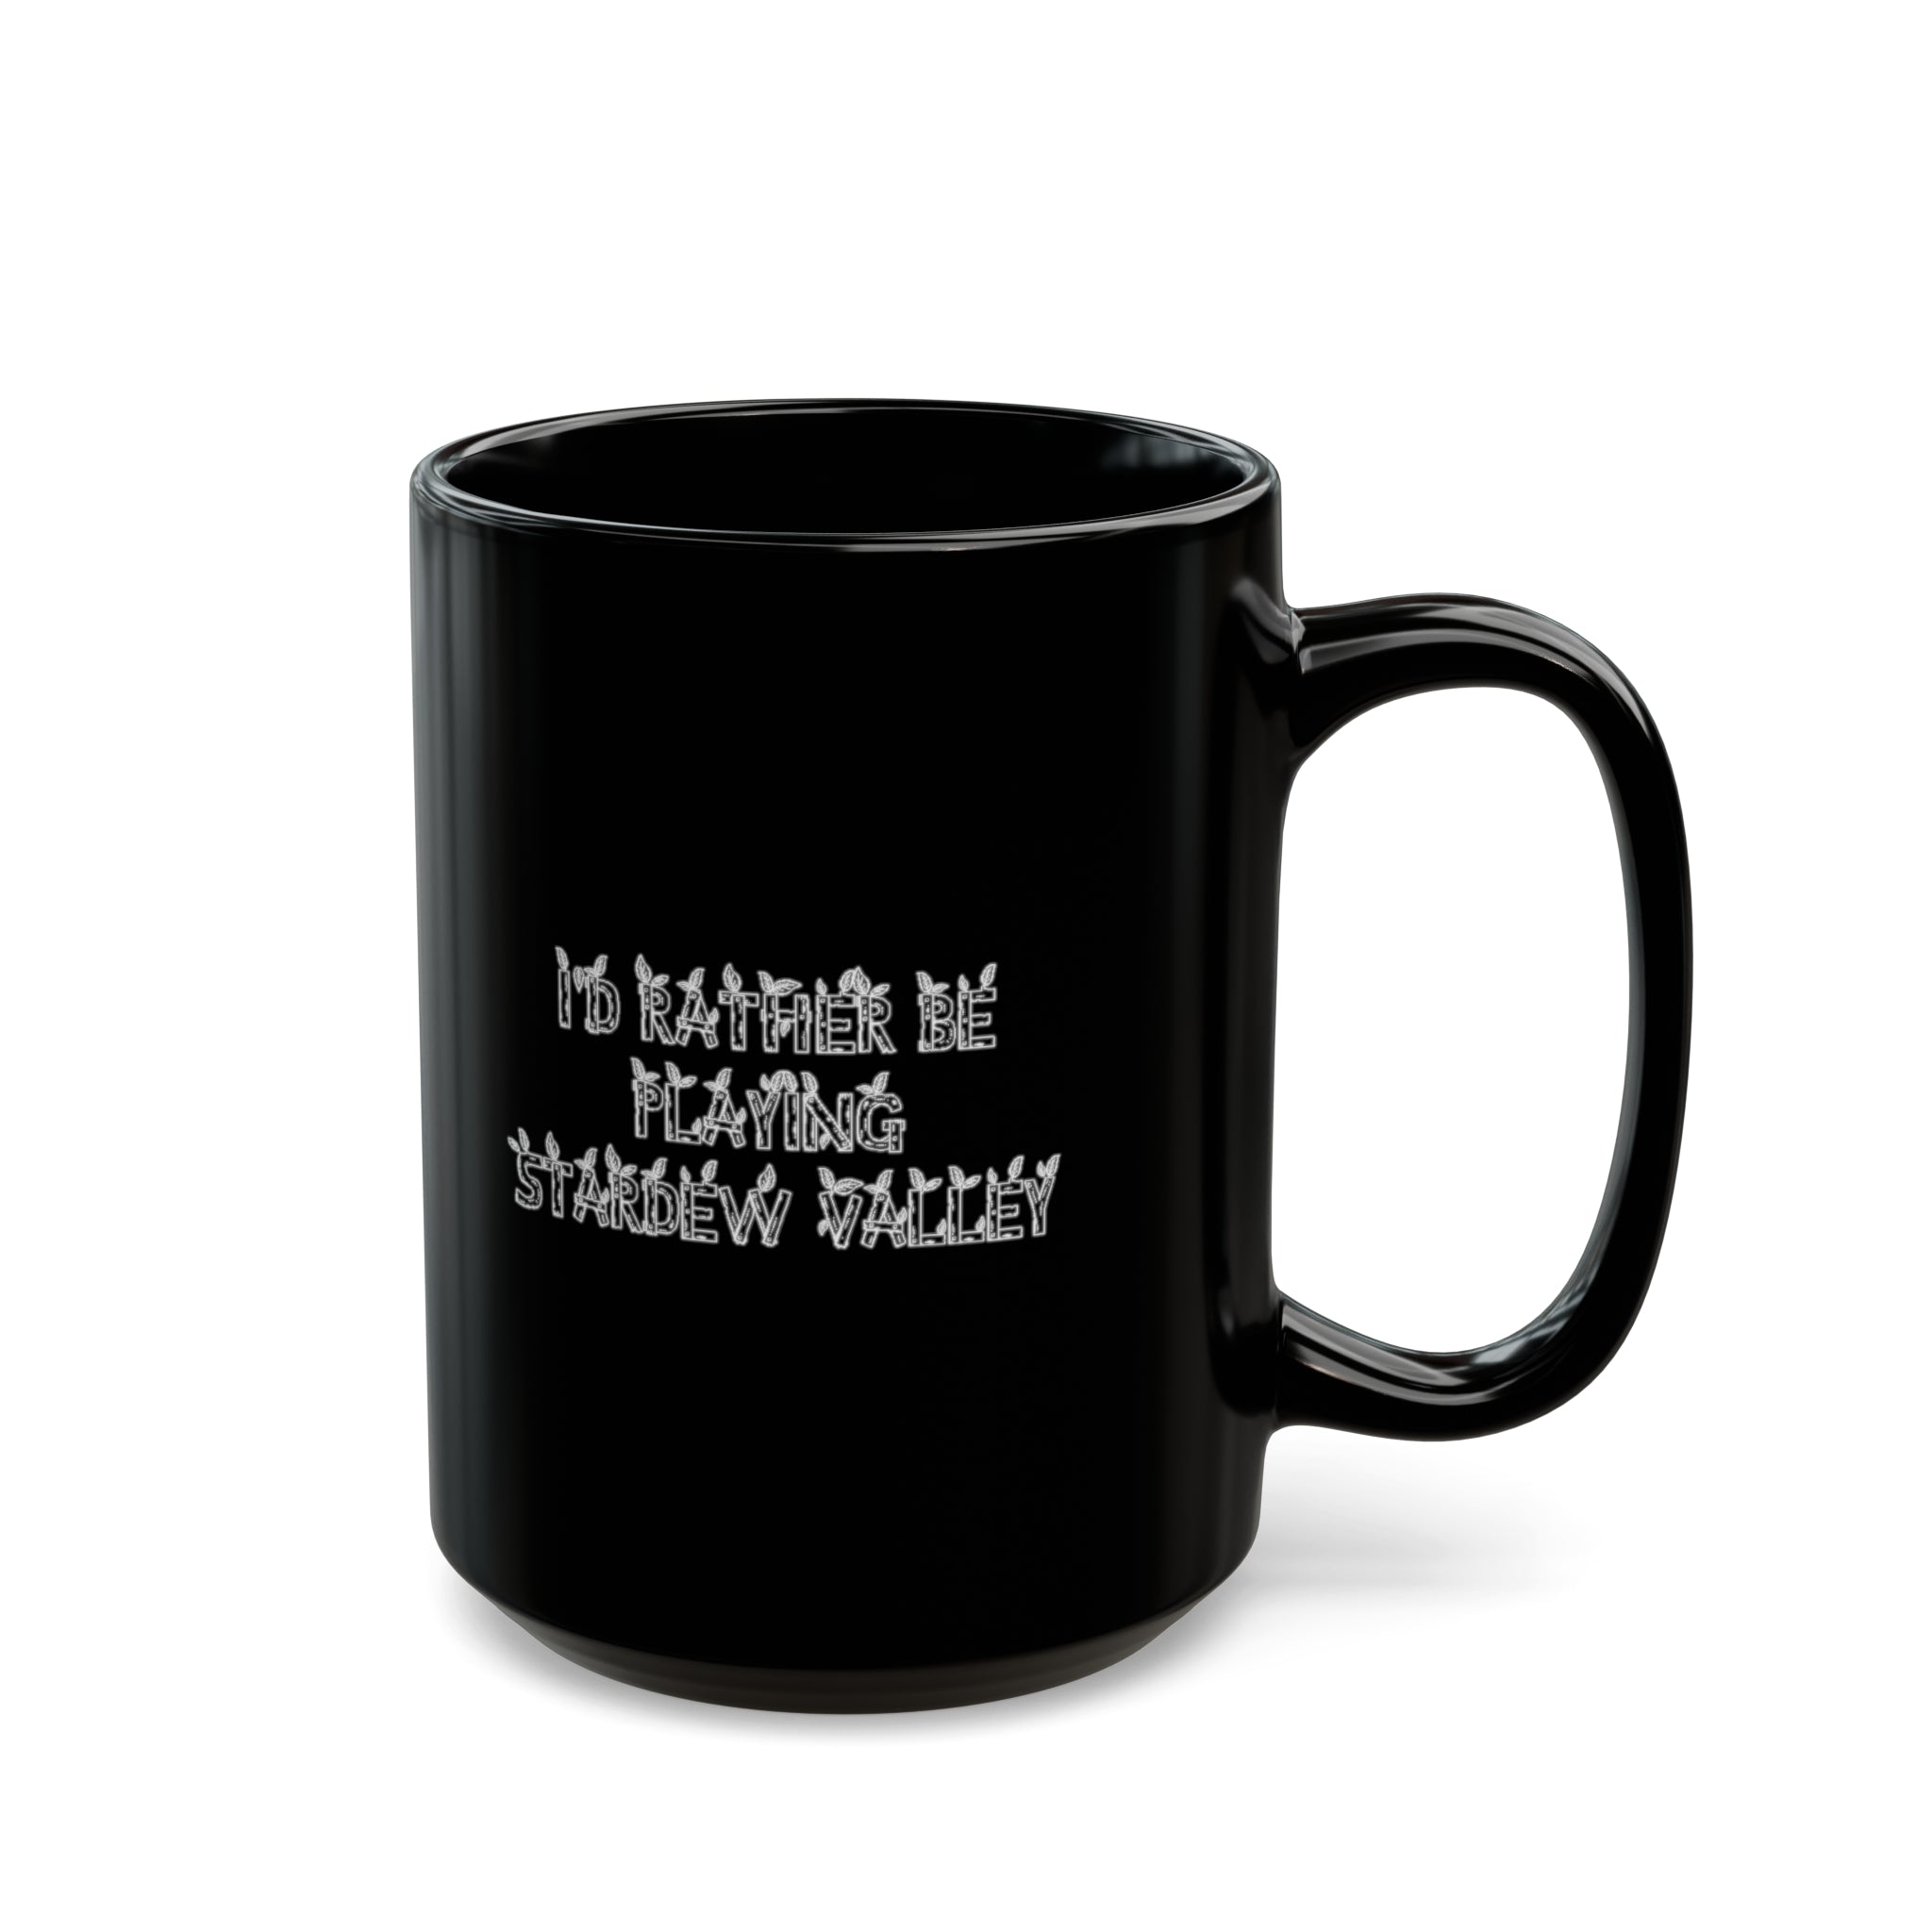 Stardew Valley I'd Rather Be Playing Black Mug (11oz, 15oz) Cups Mugs Cup Gamer Gift For Him Her Game Cup Cups Mugs Birthday Christmas Valentine's Anniversary Gifts